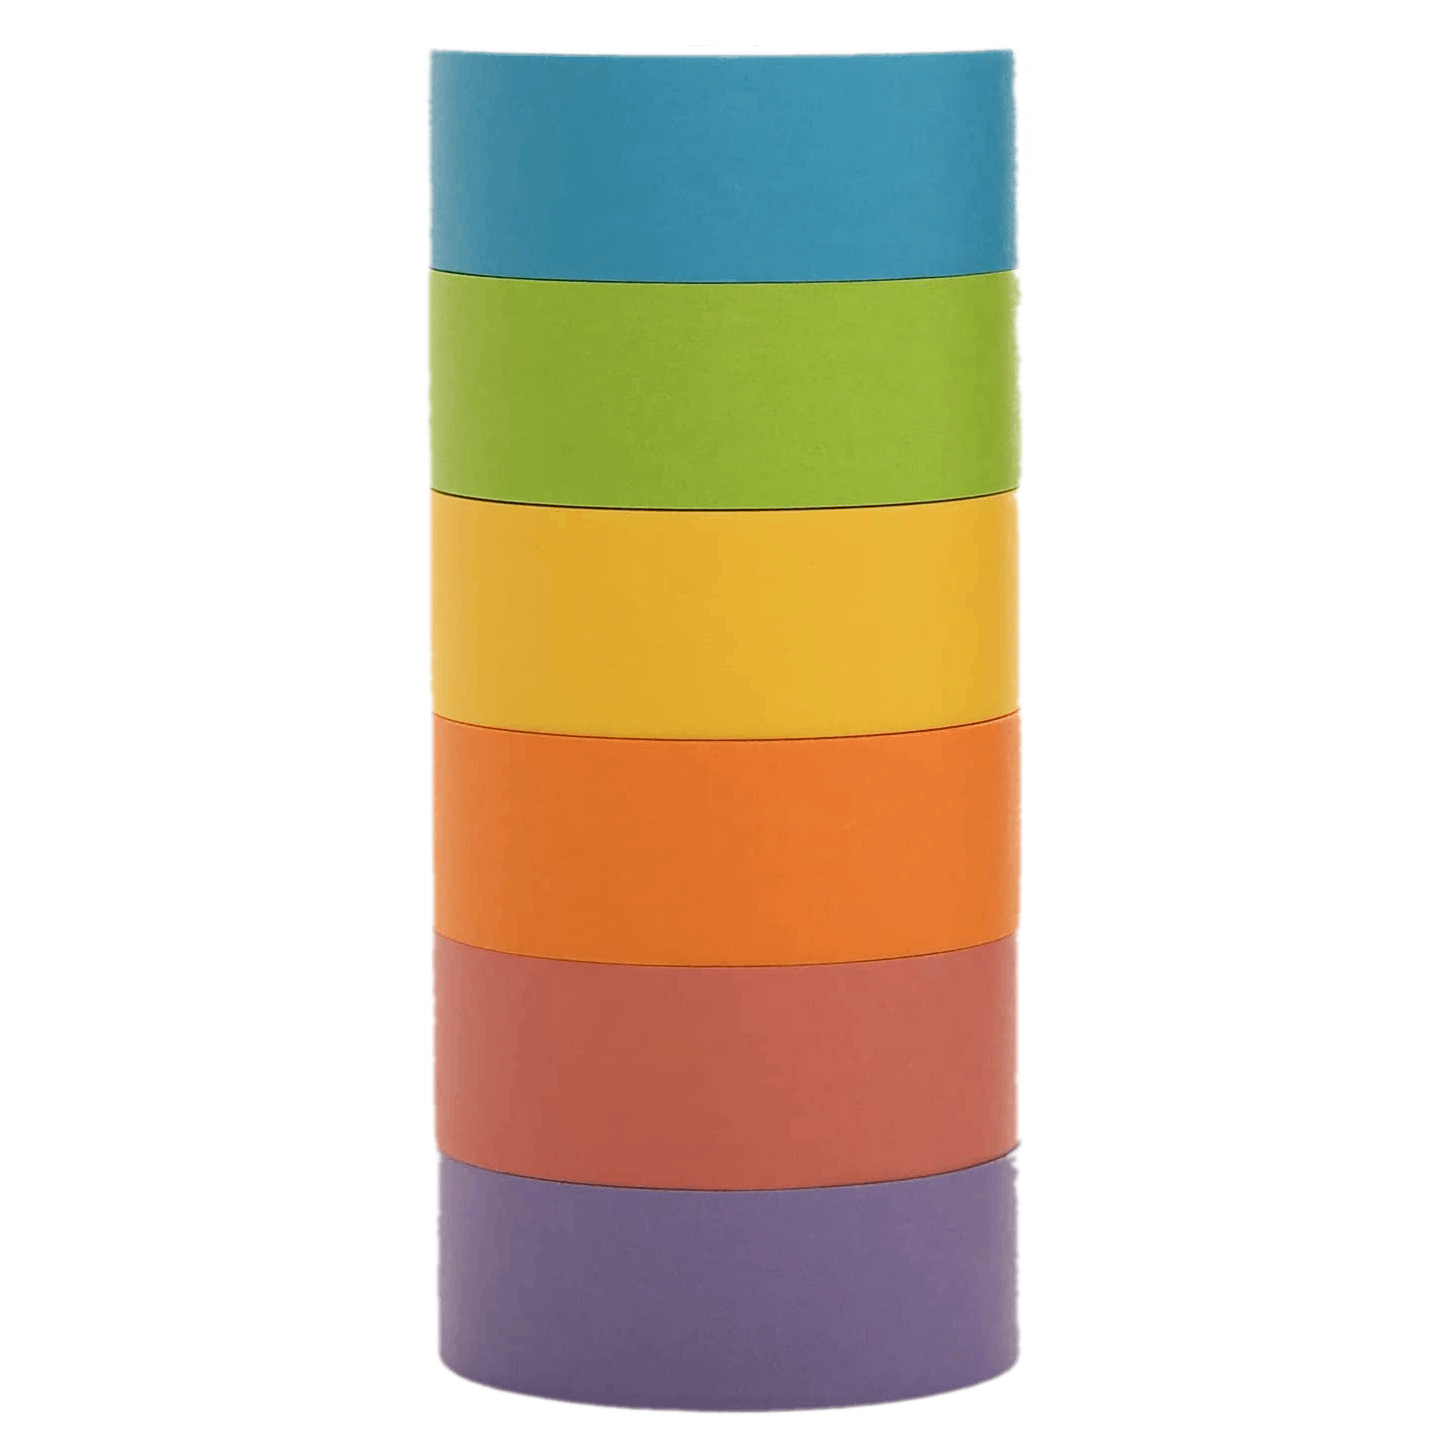  bnizy Colored Pastel Washi Paper Tape 1 Inch Wide– 7